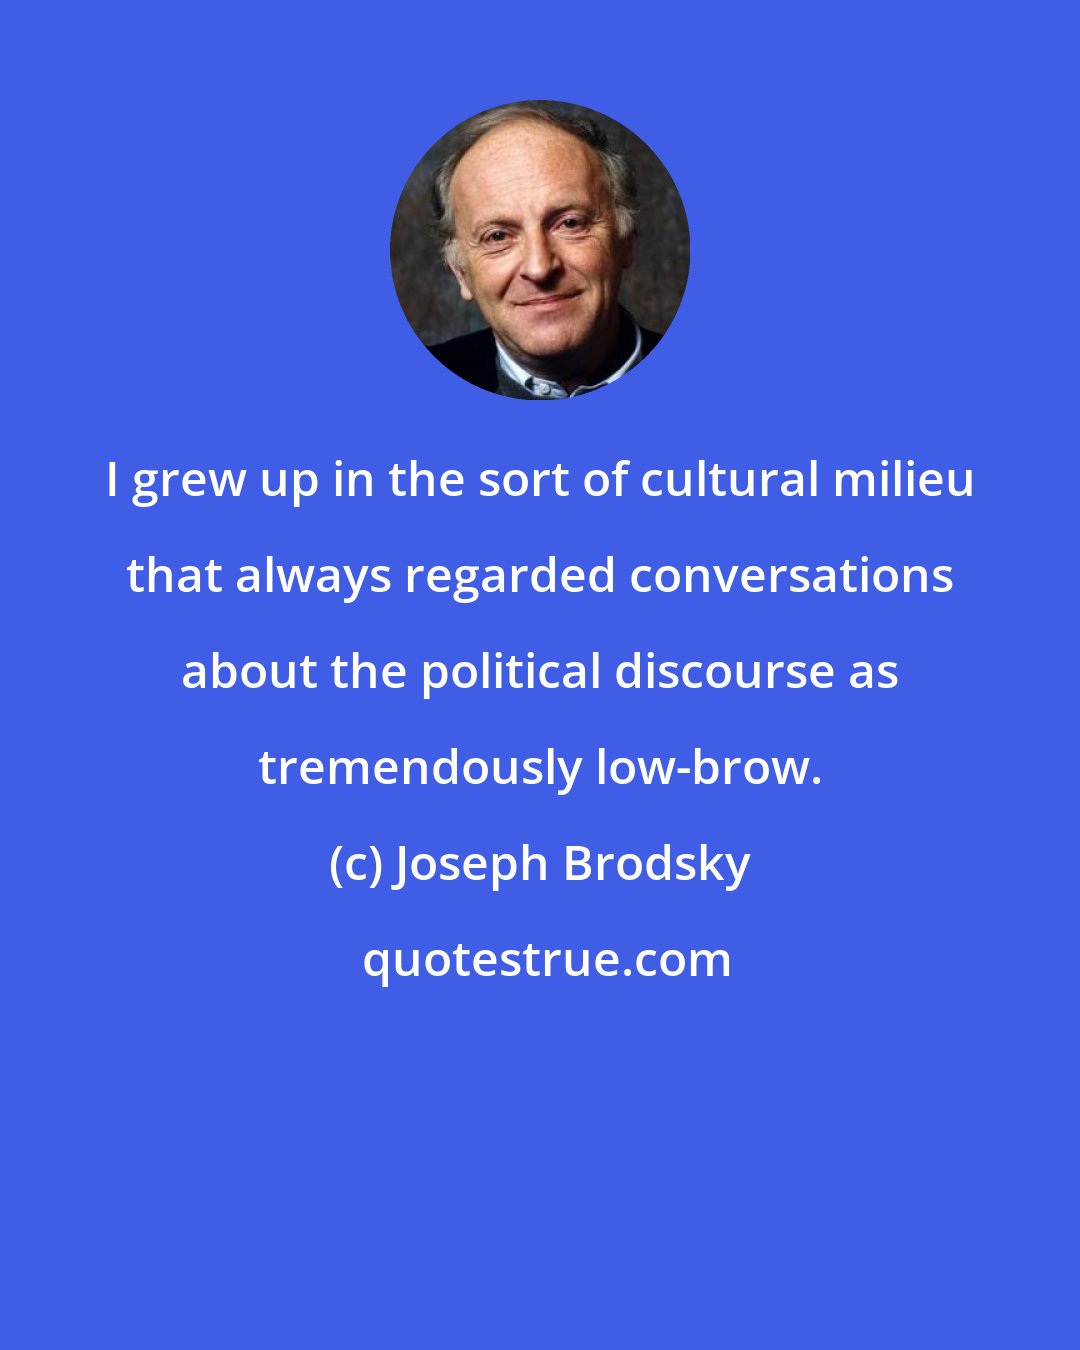 Joseph Brodsky: I grew up in the sort of cultural milieu that always regarded conversations about the political discourse as tremendously low-brow.